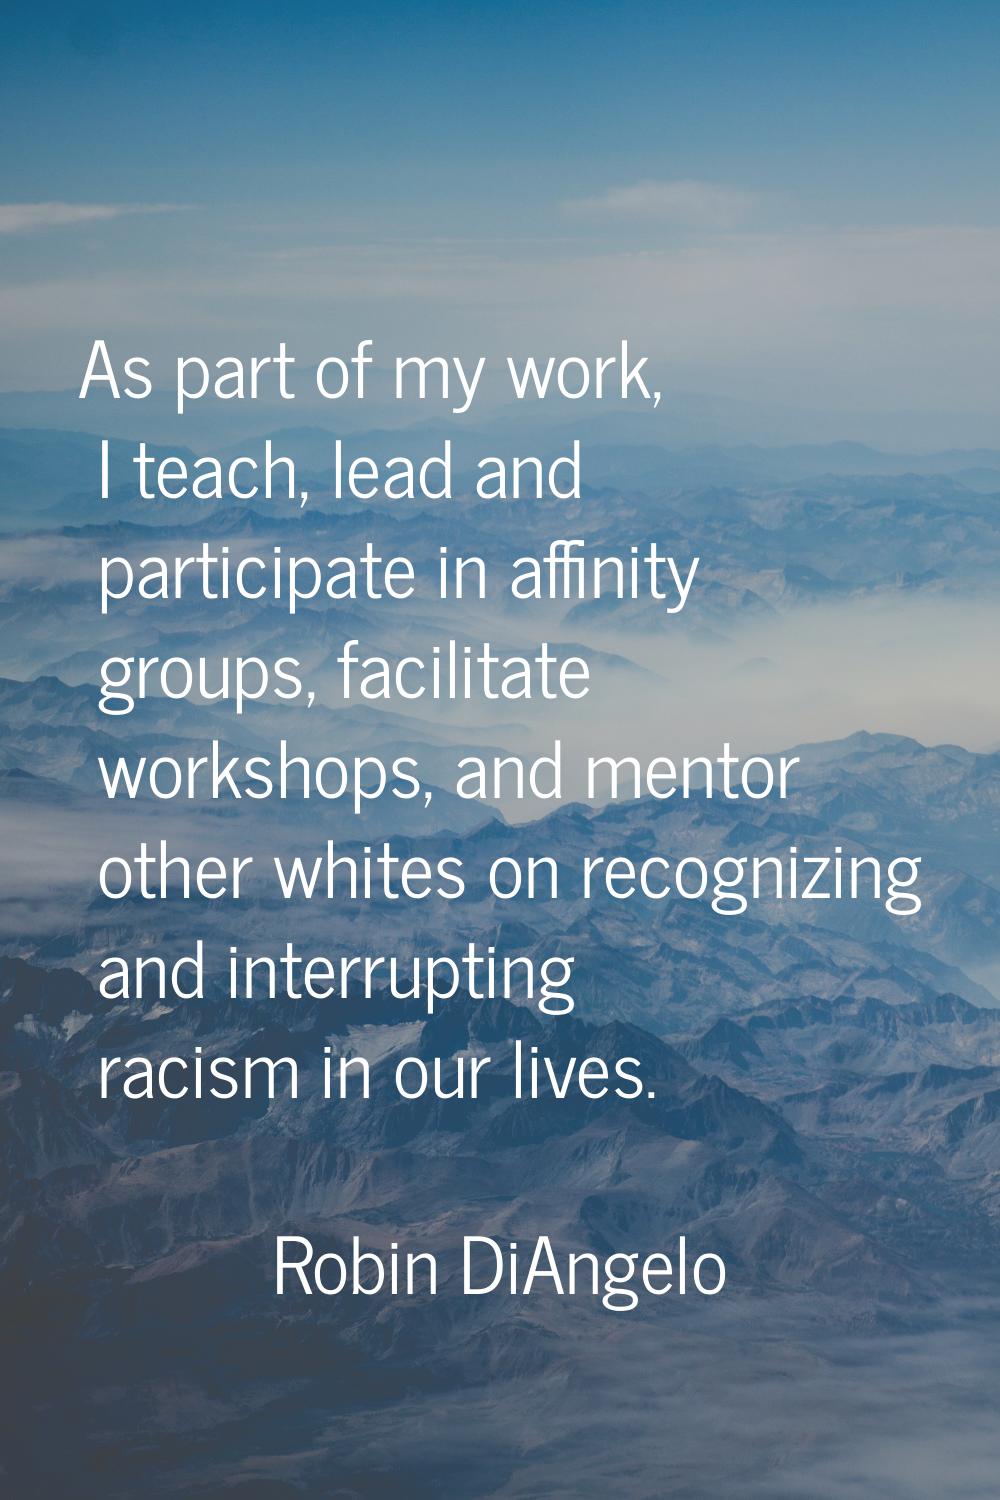 As part of my work, I teach, lead and participate in affinity groups, facilitate workshops, and men